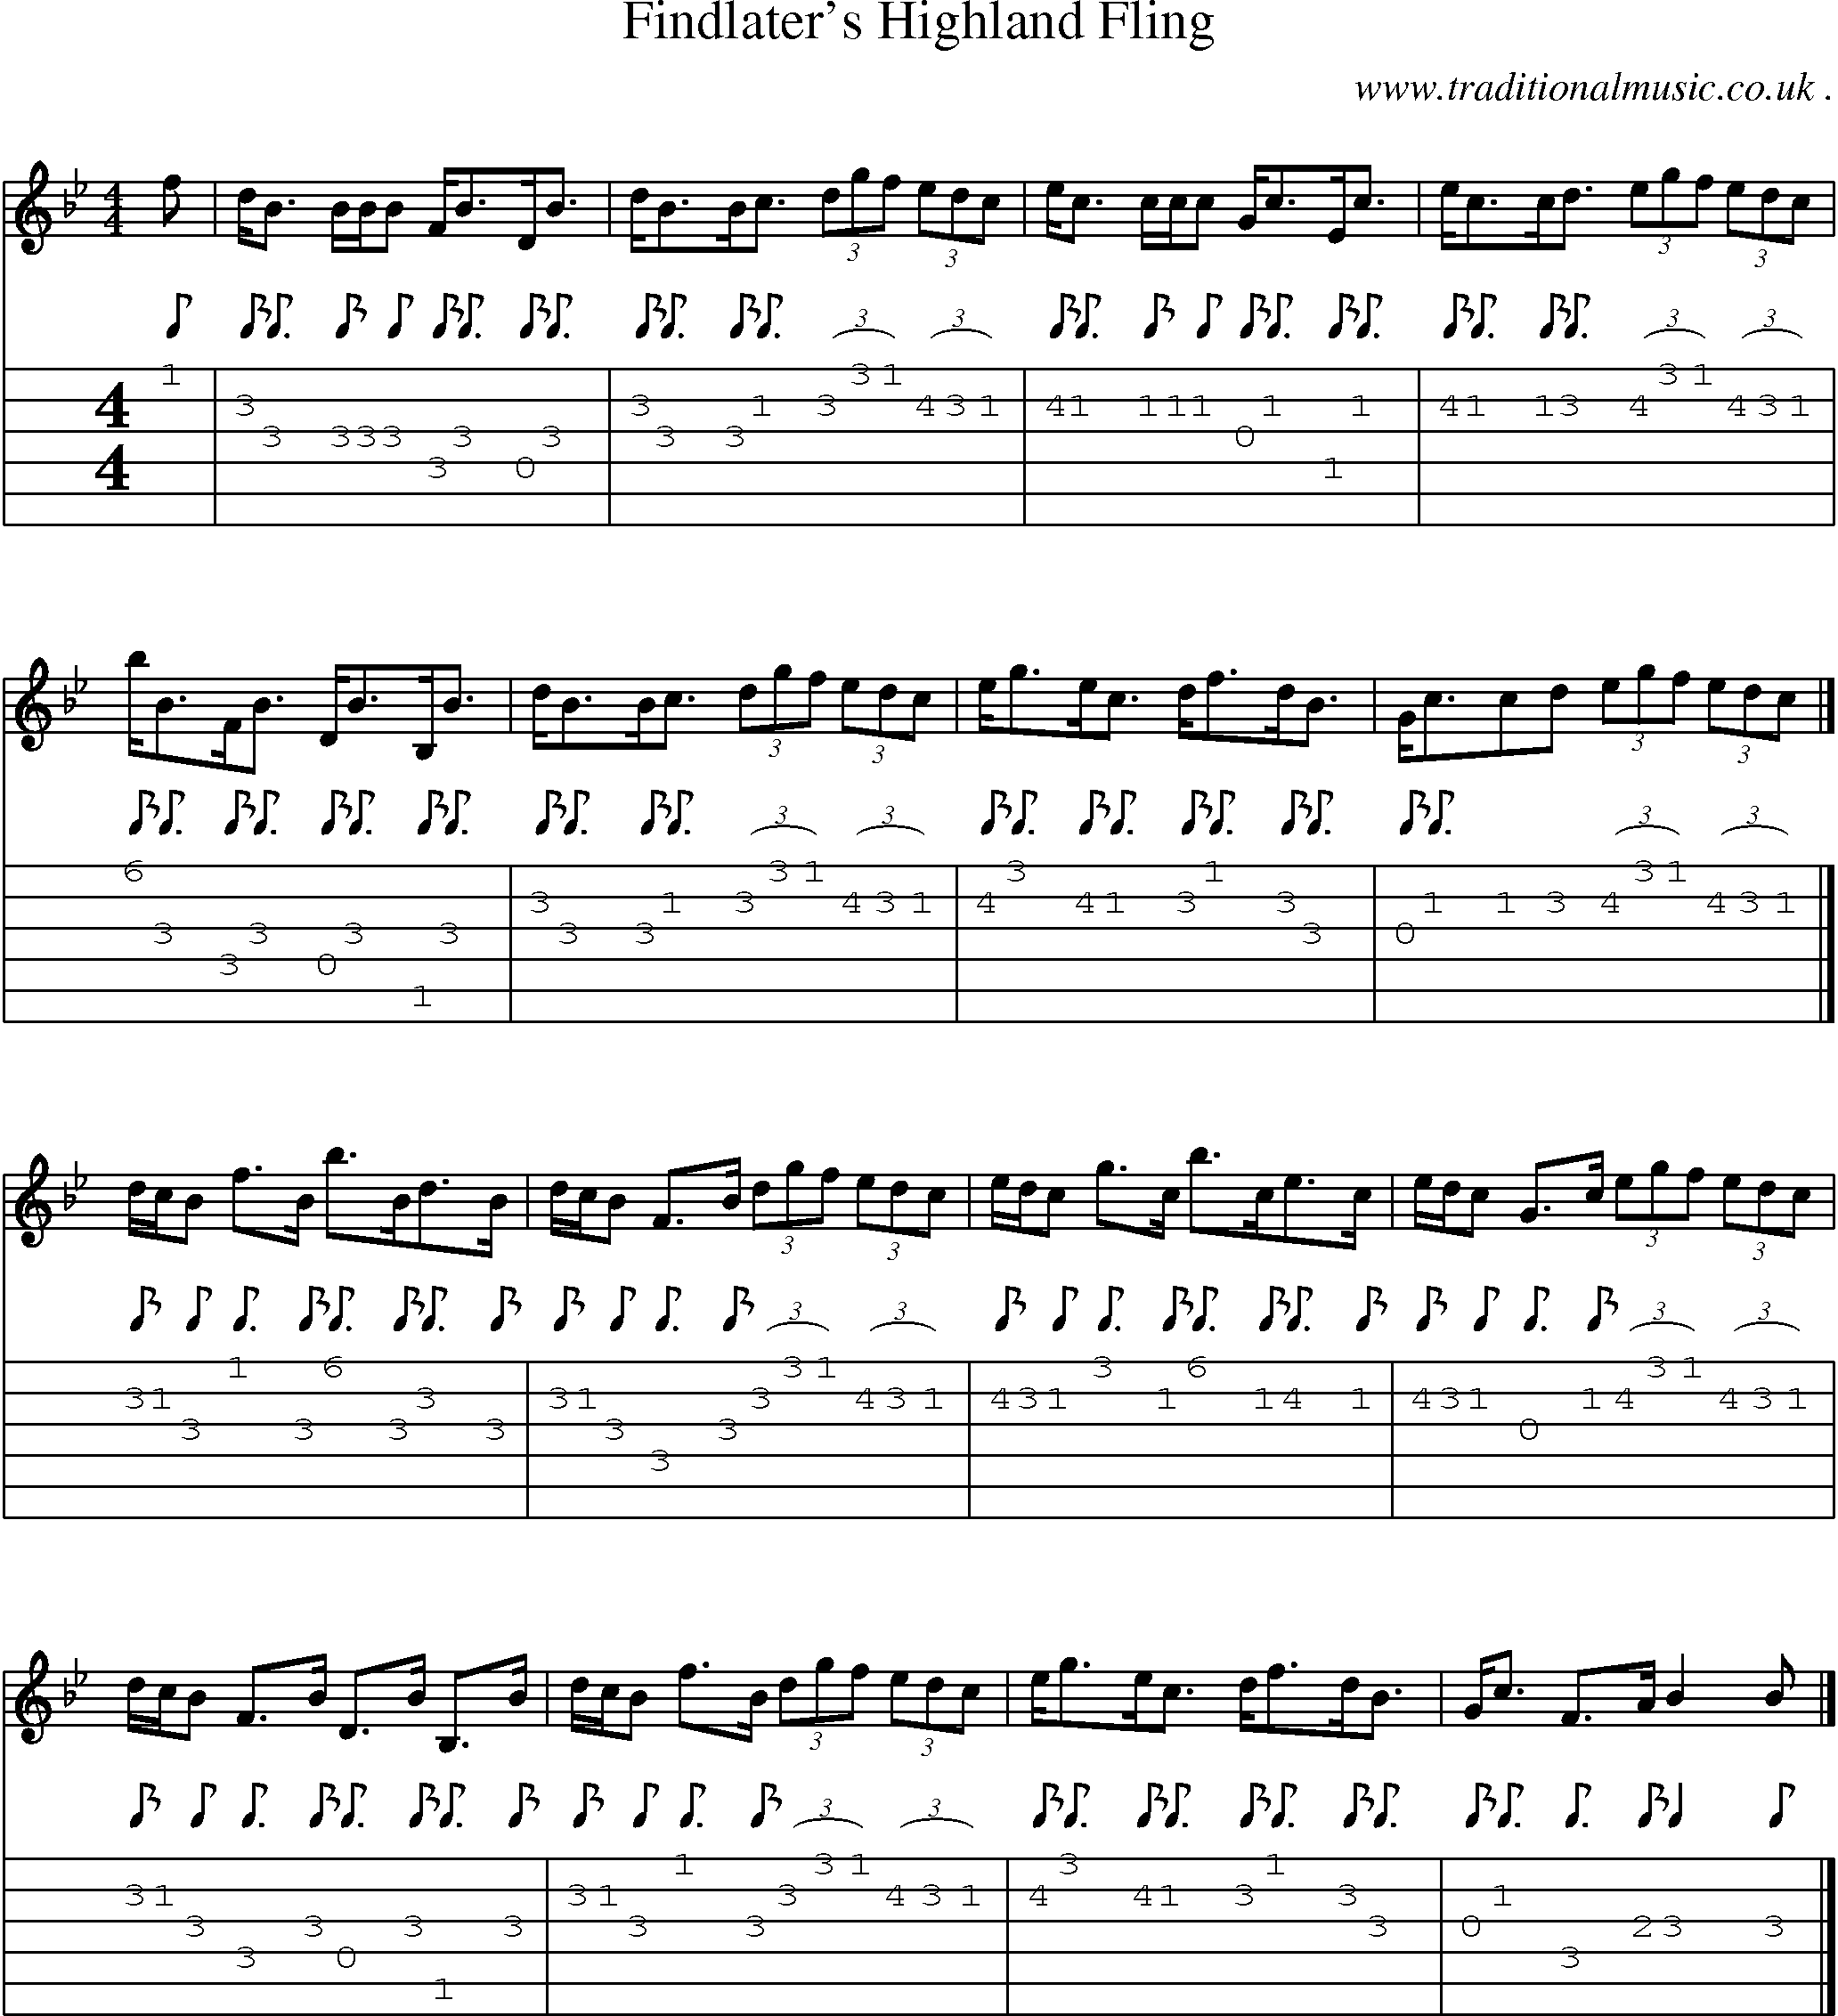 Sheet-music  score, Chords and Guitar Tabs for Findlaters Highland Fling